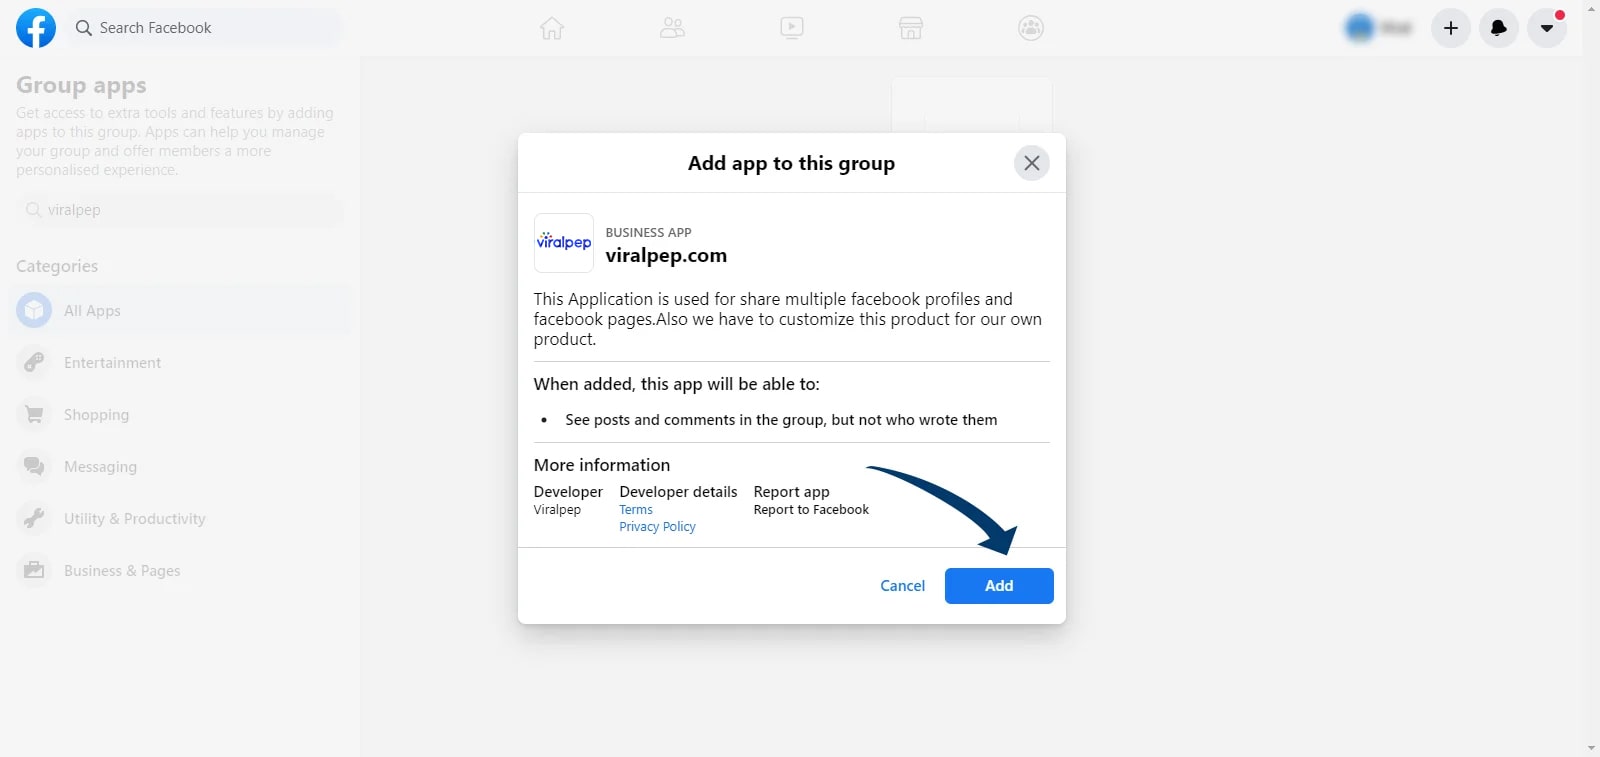 Add App To Group By Clicking Add Button